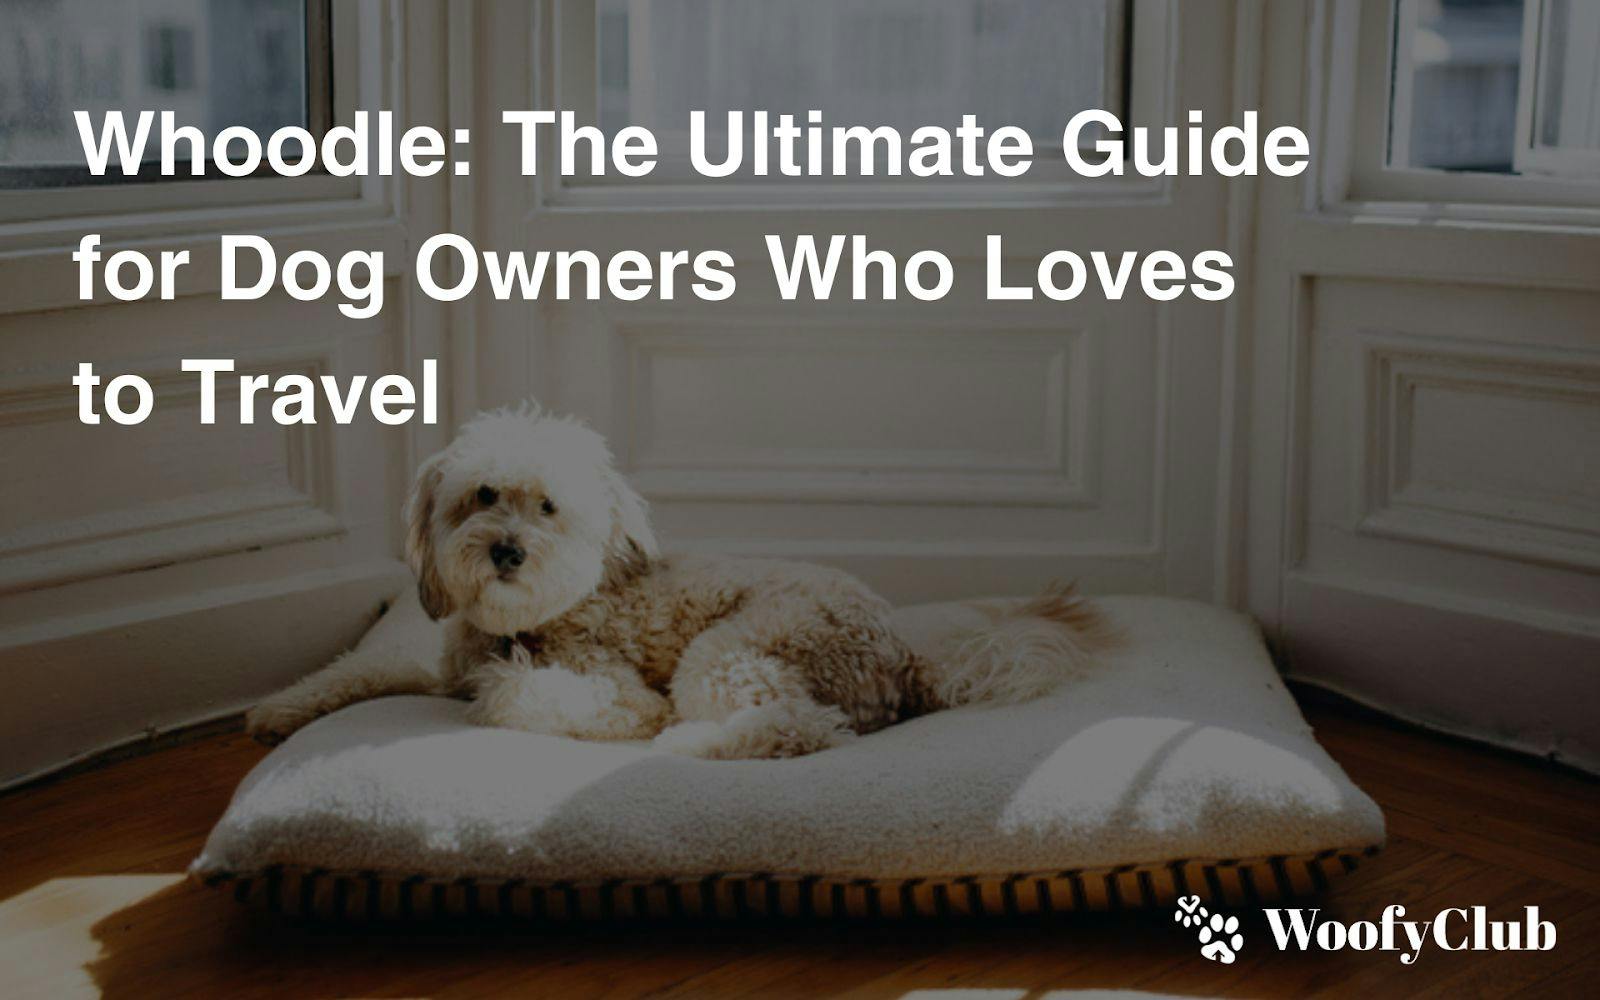 Whoodle: The Ultimate Guide For Dog Owners Who Love To Travel